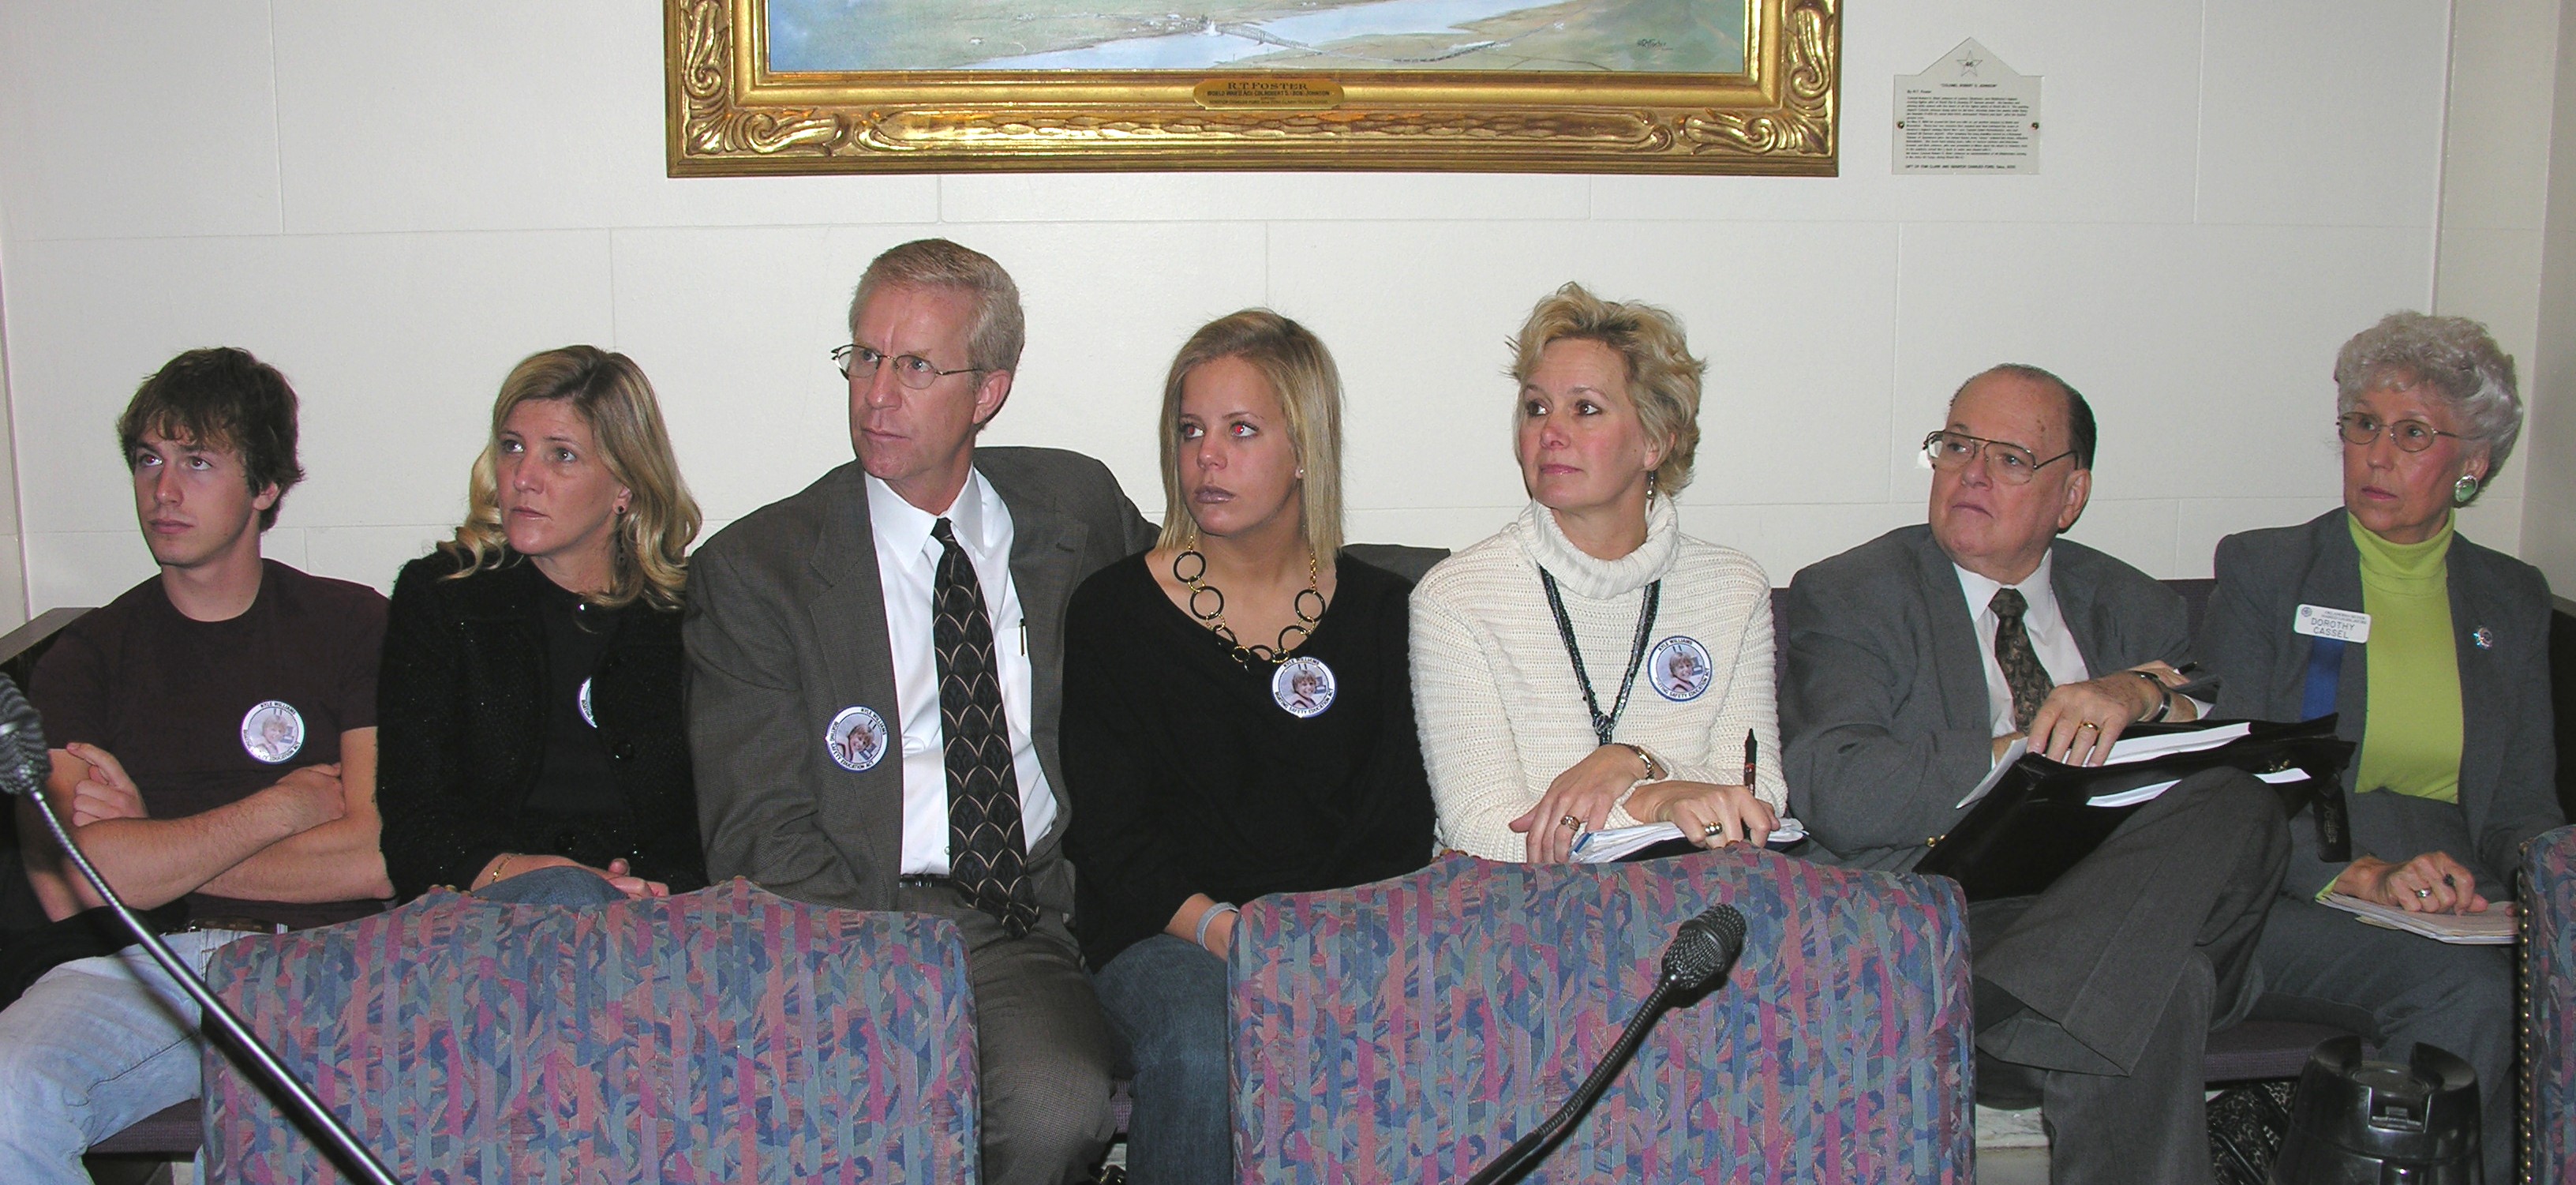 Friends and family of Kyle Williams, including parents Will and Sue, listen to testimony in support of SB 1495, the Kyle Williams Boating Safety Education Act.